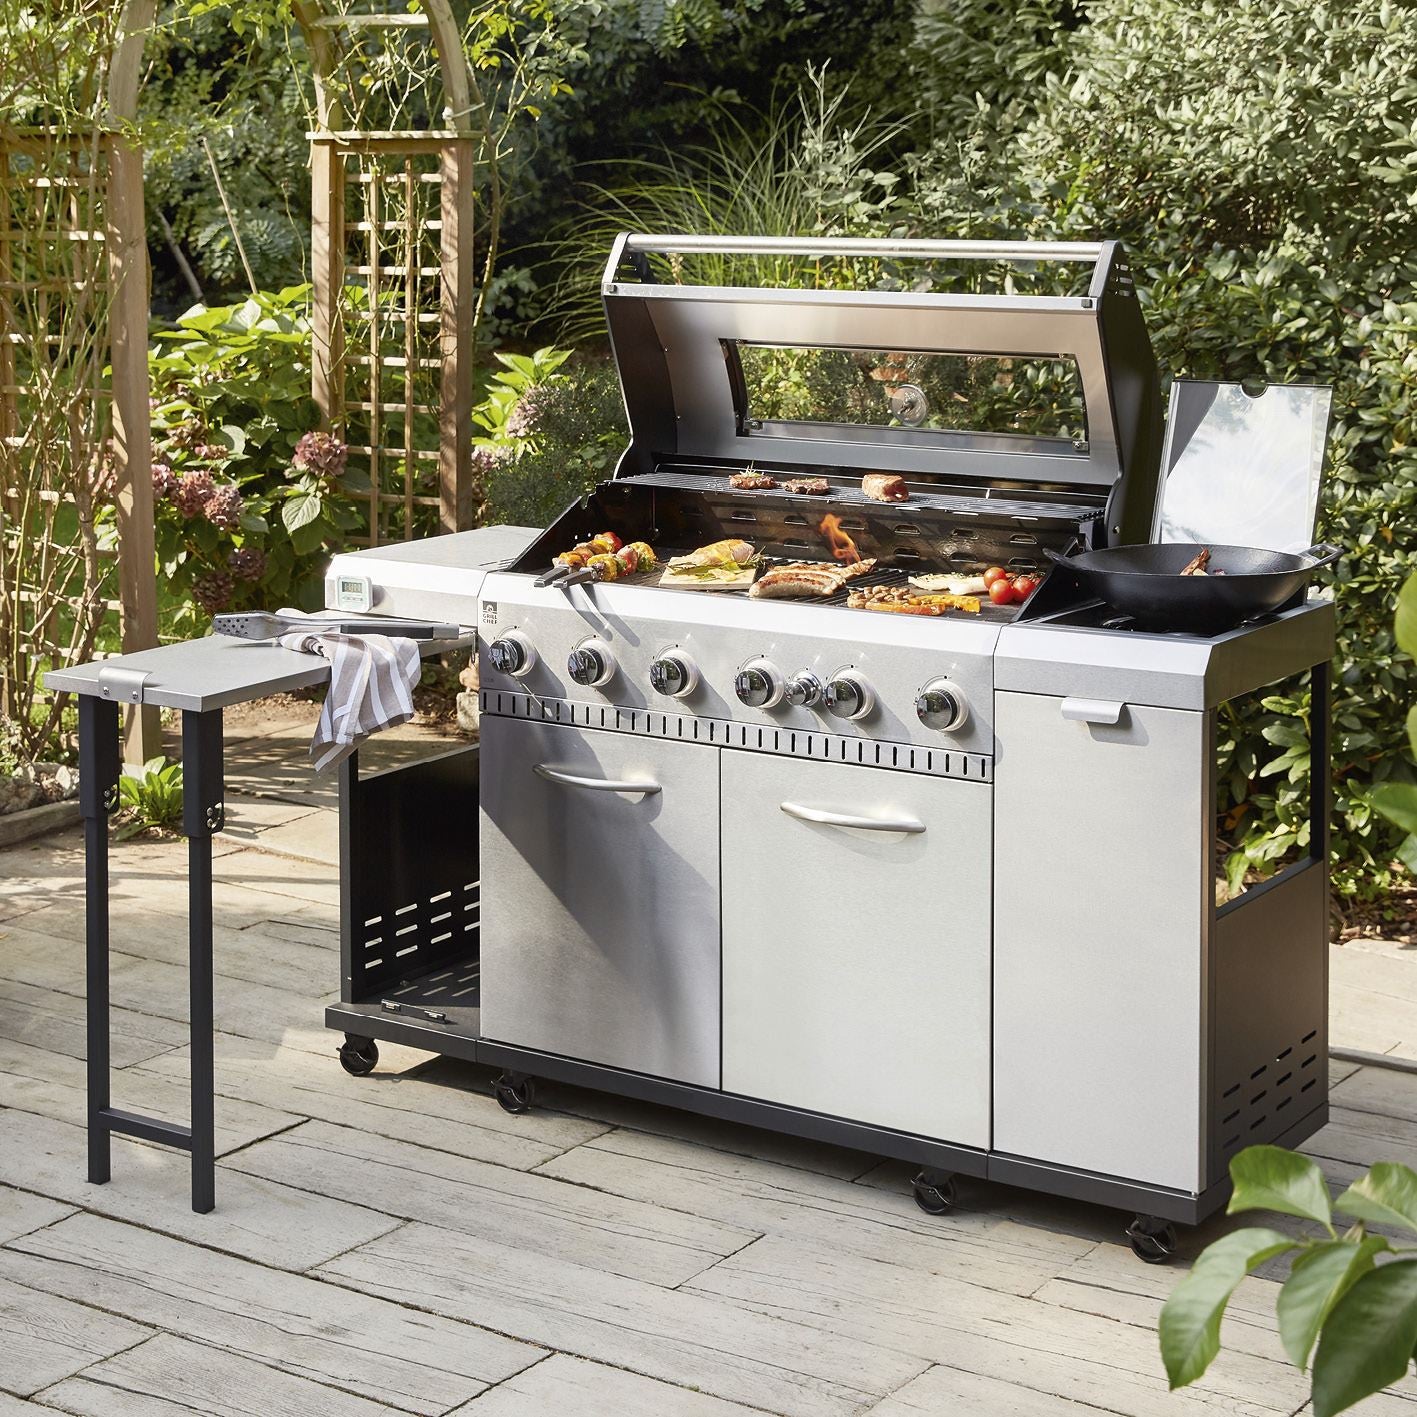 Rexon cooK 6.1 Gas BBQ - Stainless Steel & Weatherproof Cover